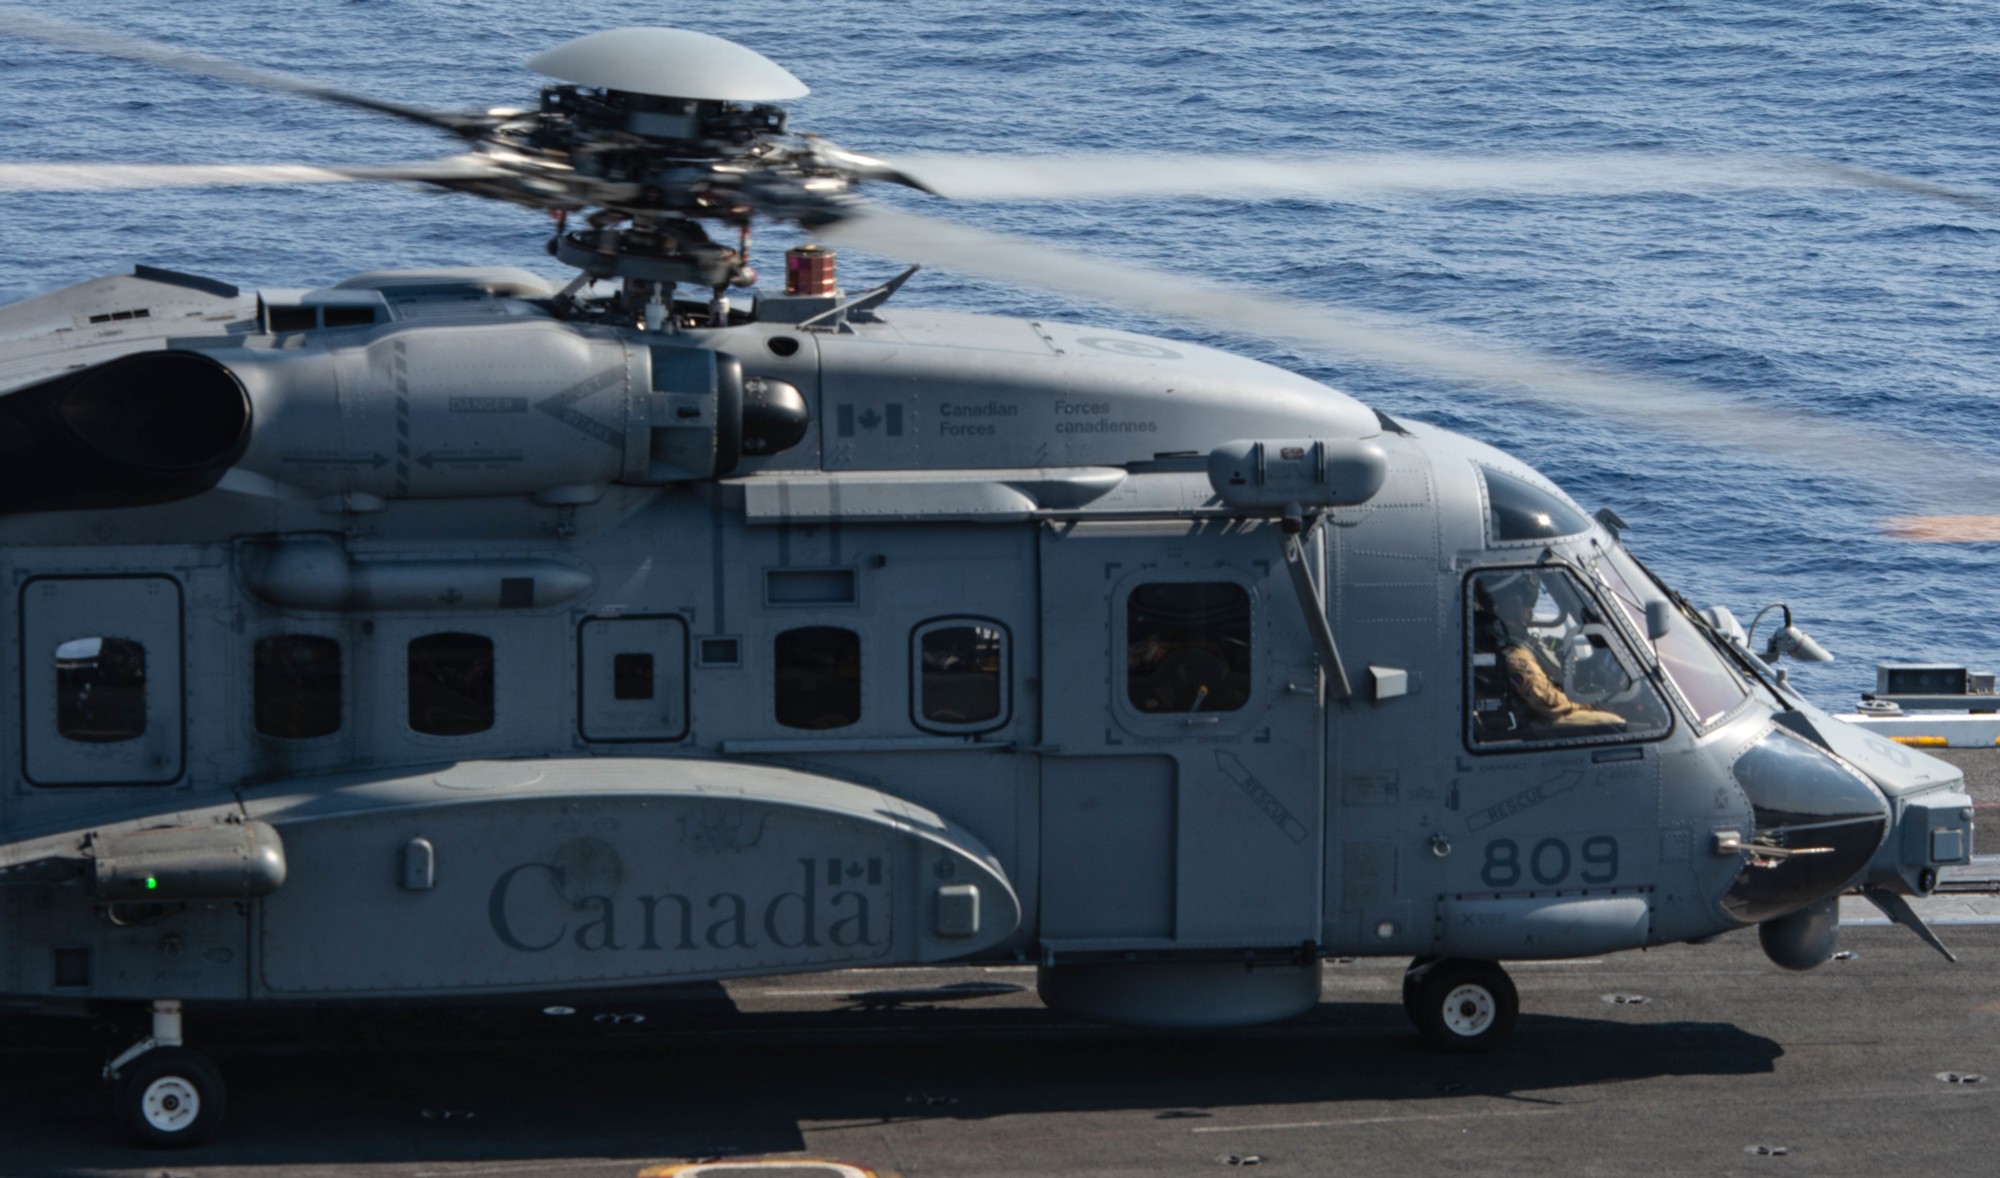 ch-148 cyclone naval helicopter royal canadian air force navy rcaf sikorsky hmcs 406 423 443 maritime squadron 09